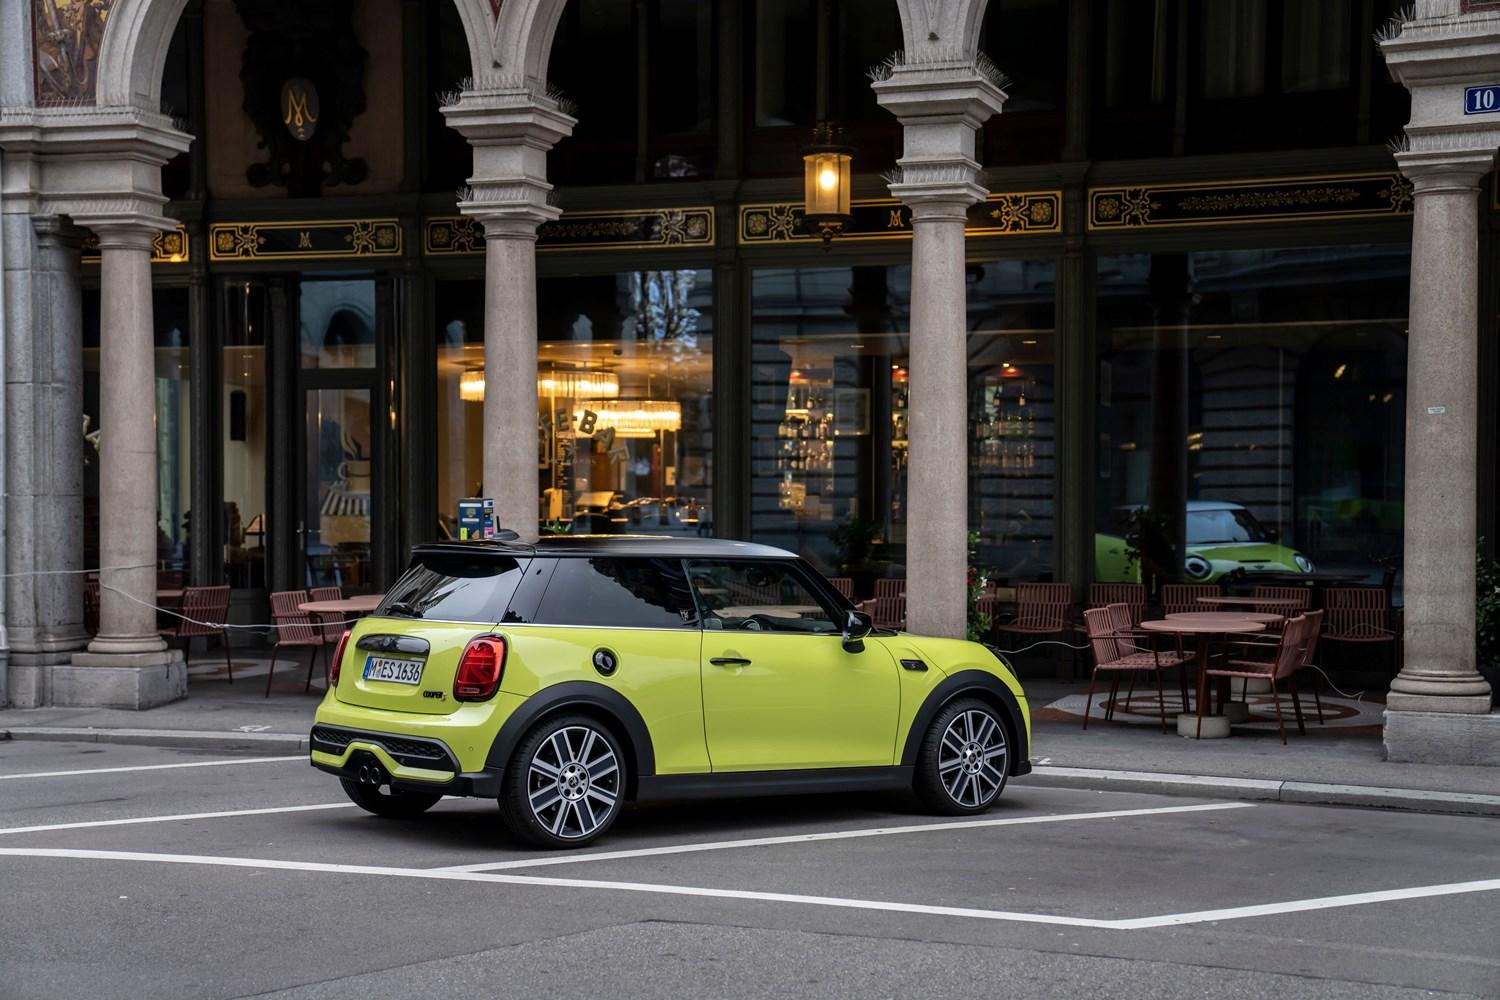 Rear view of the new MINI 3-Door Hatchback in yellow, parked in car park space next to old building with shops in European city